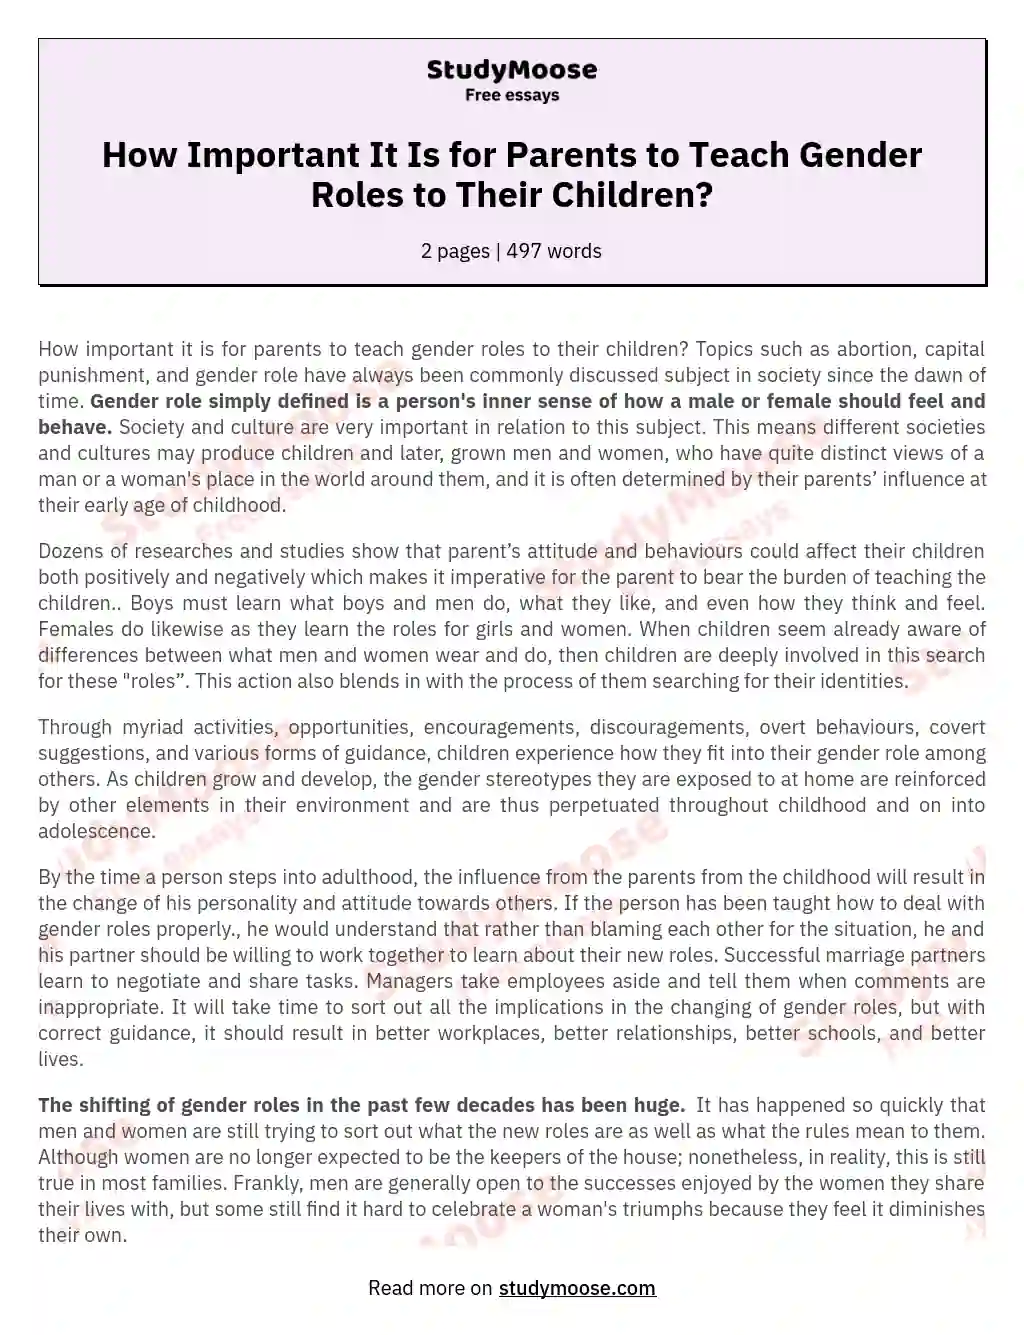 How Important It Is for Parents to Teach Gender Roles to Their Children? essay